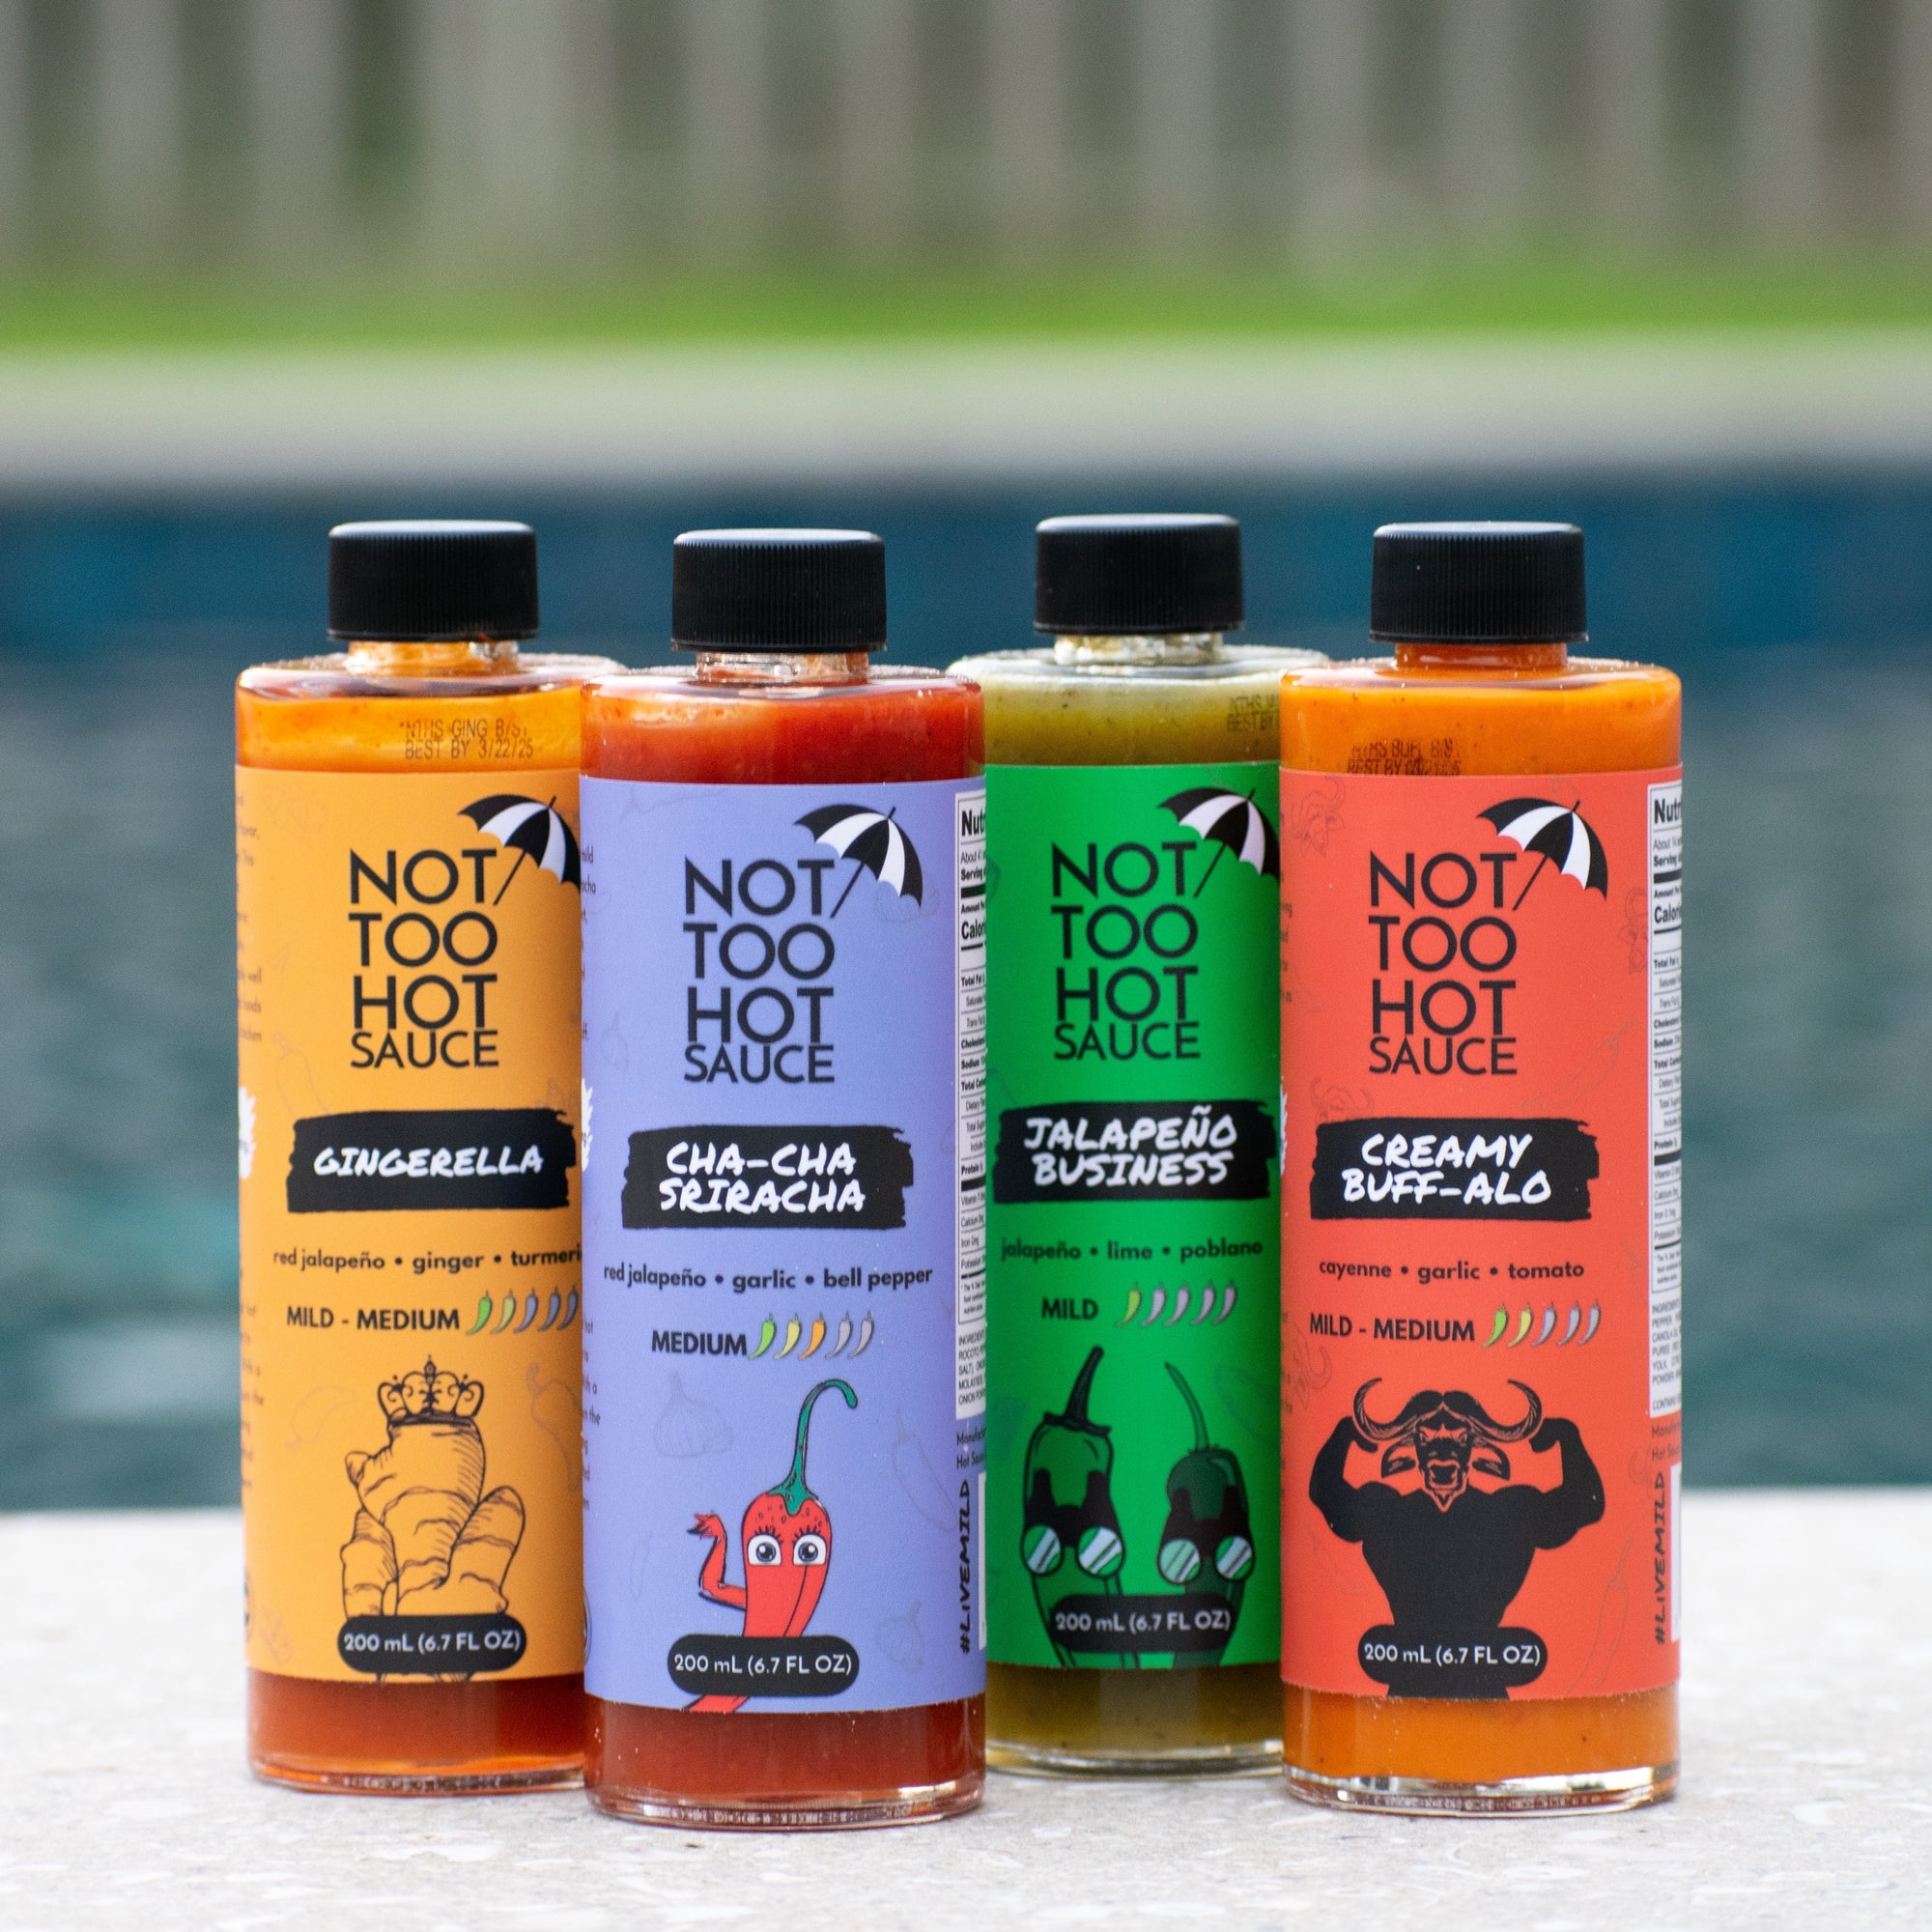 Classic Hot Sauce Variety Pack - Try for $3 per Bottle Not Too Hot Sauce